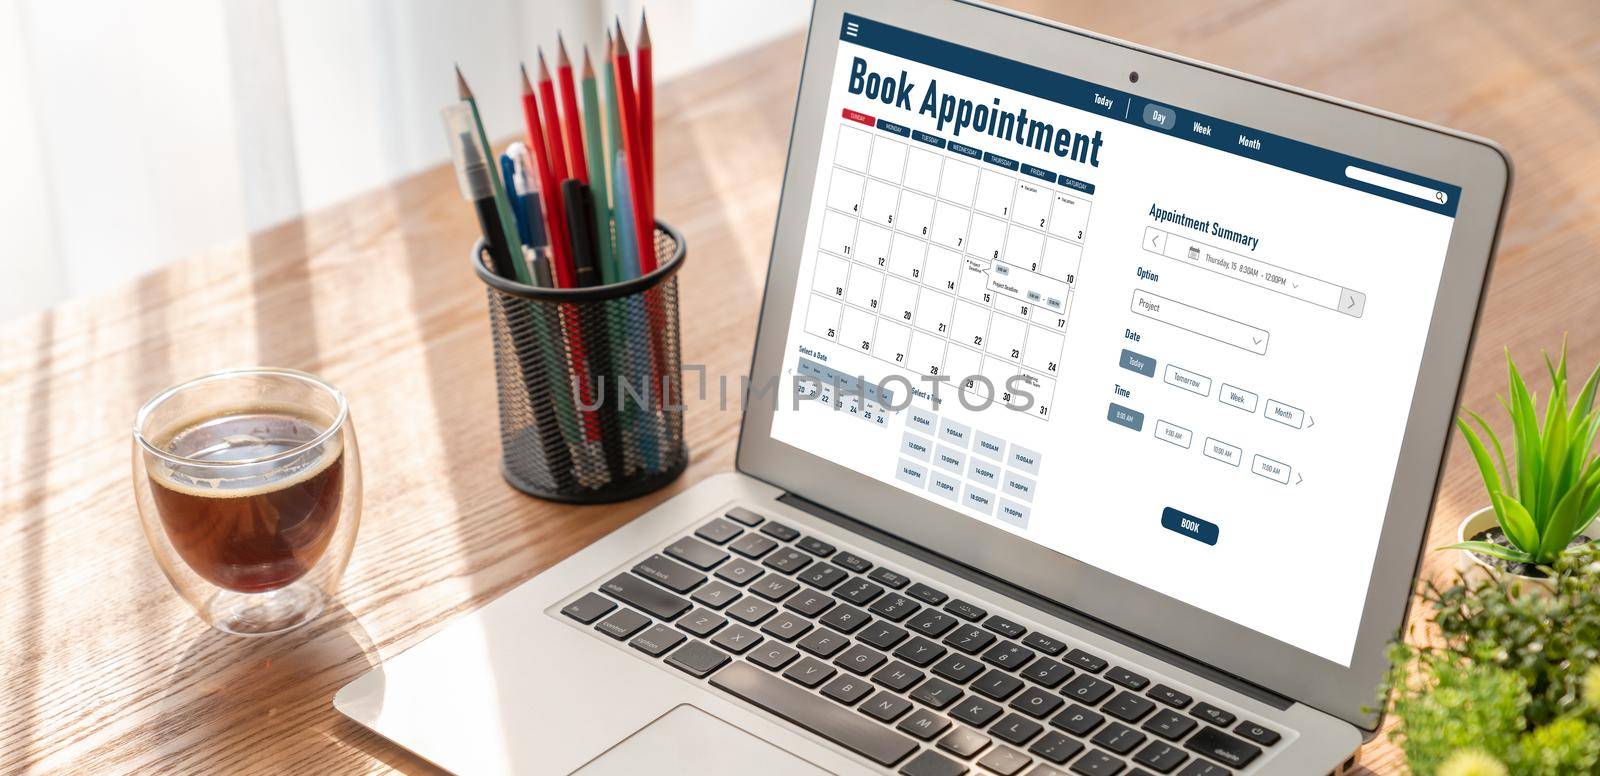 Online applointment booking calendar for modish regristration by biancoblue